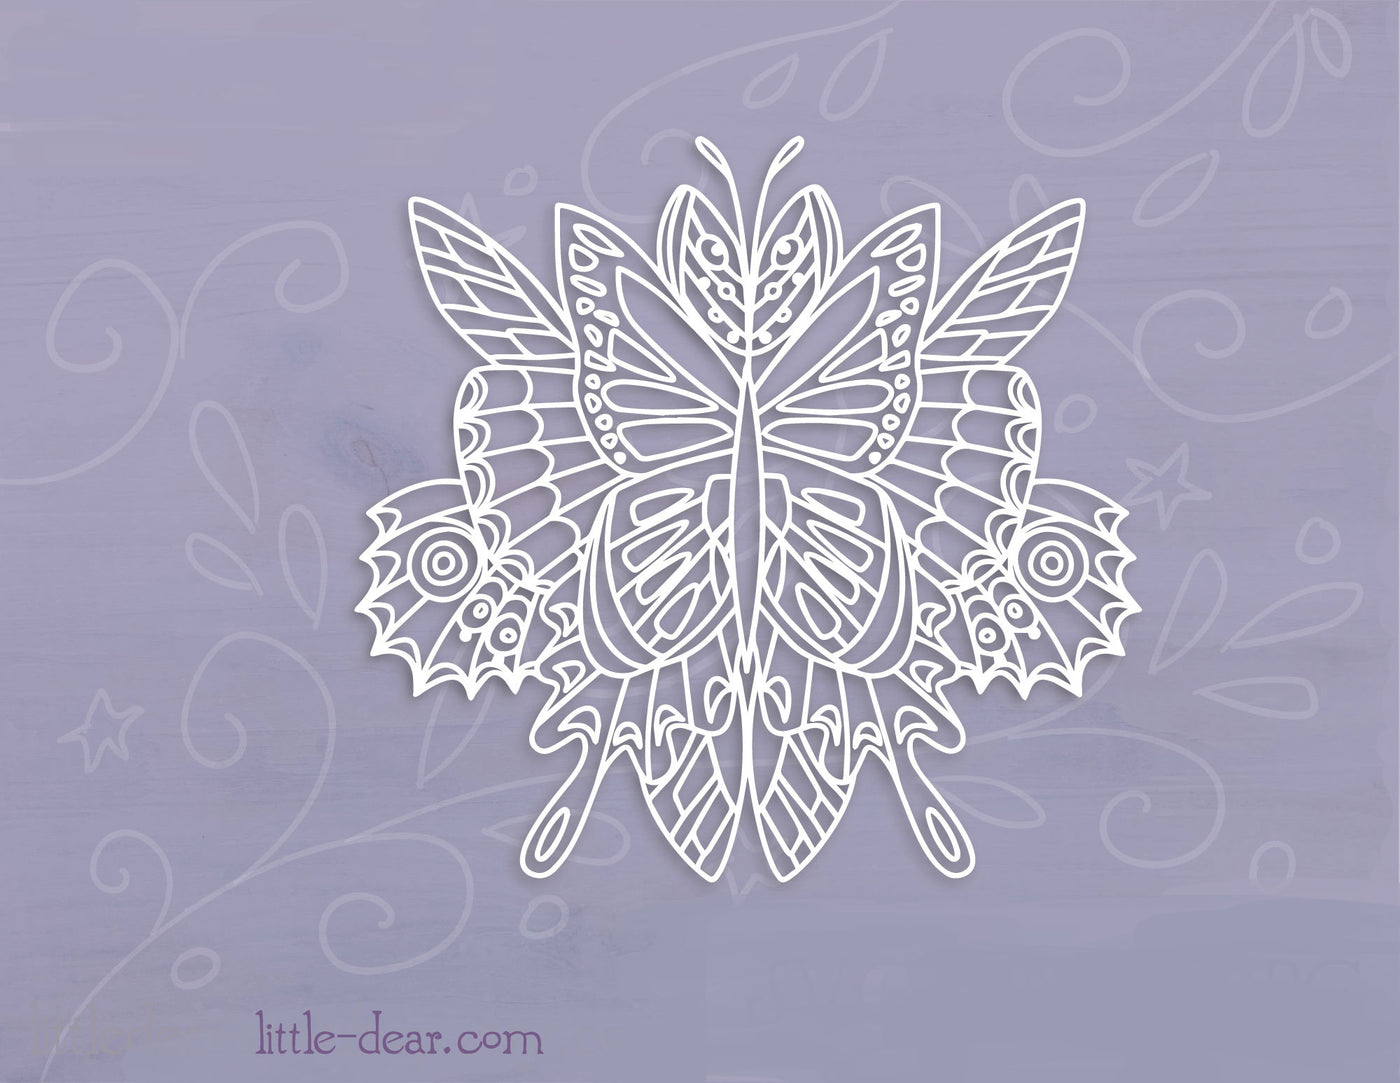 SVG Butterfly Wings cut file for Cricut, Silhouette, PNG, JPG